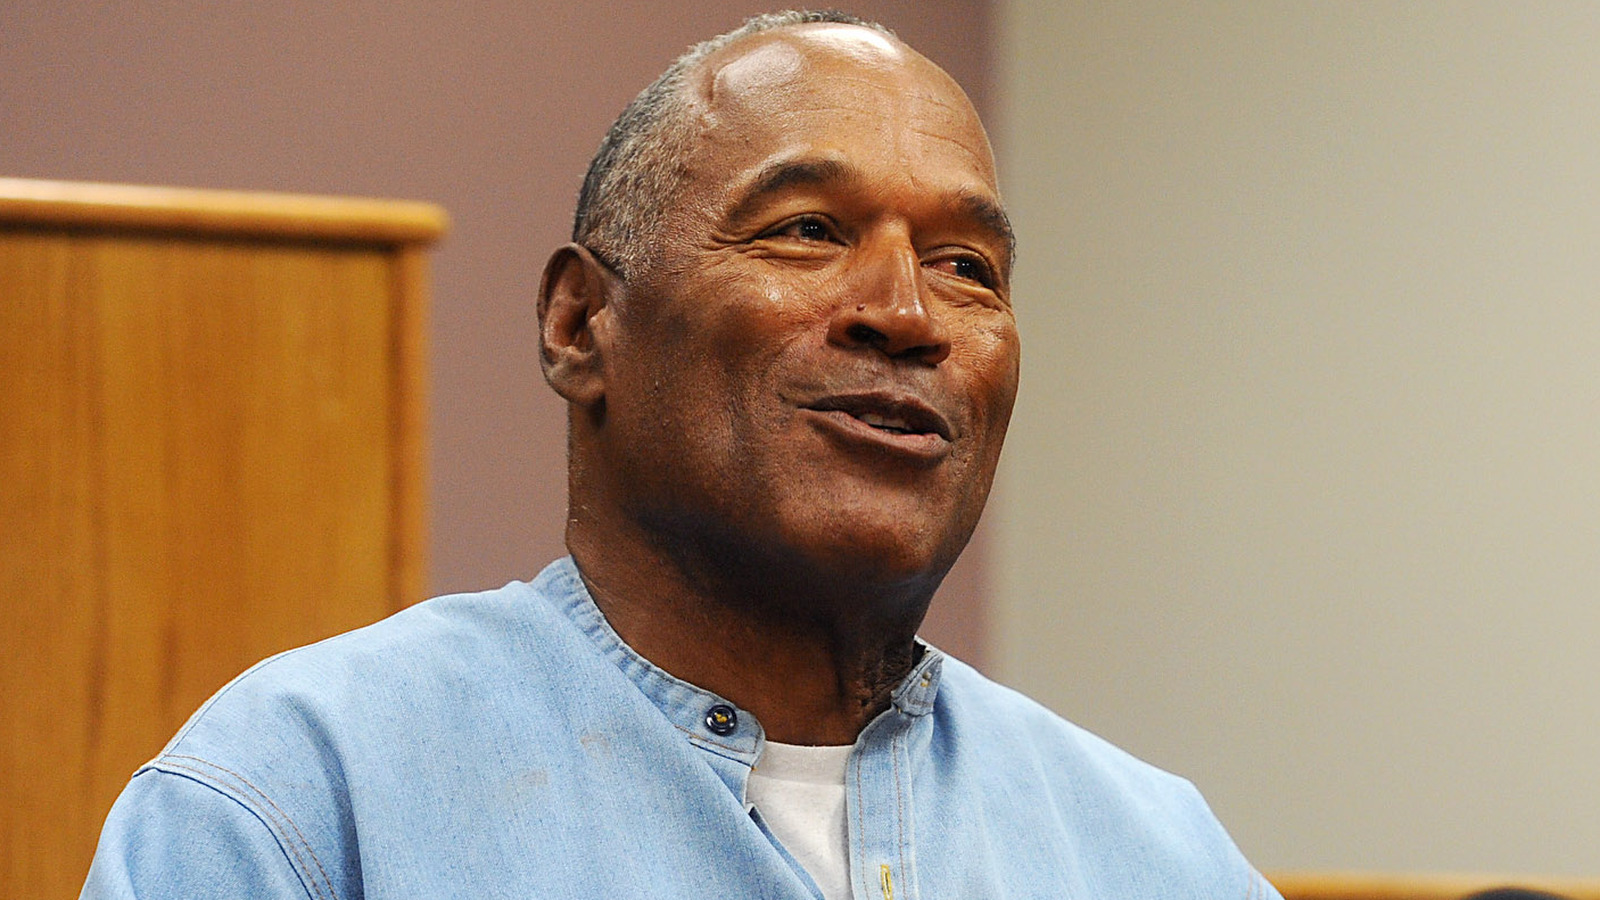 The Strange Request O.J. Simpson Made To Loved Ones In His Final Days